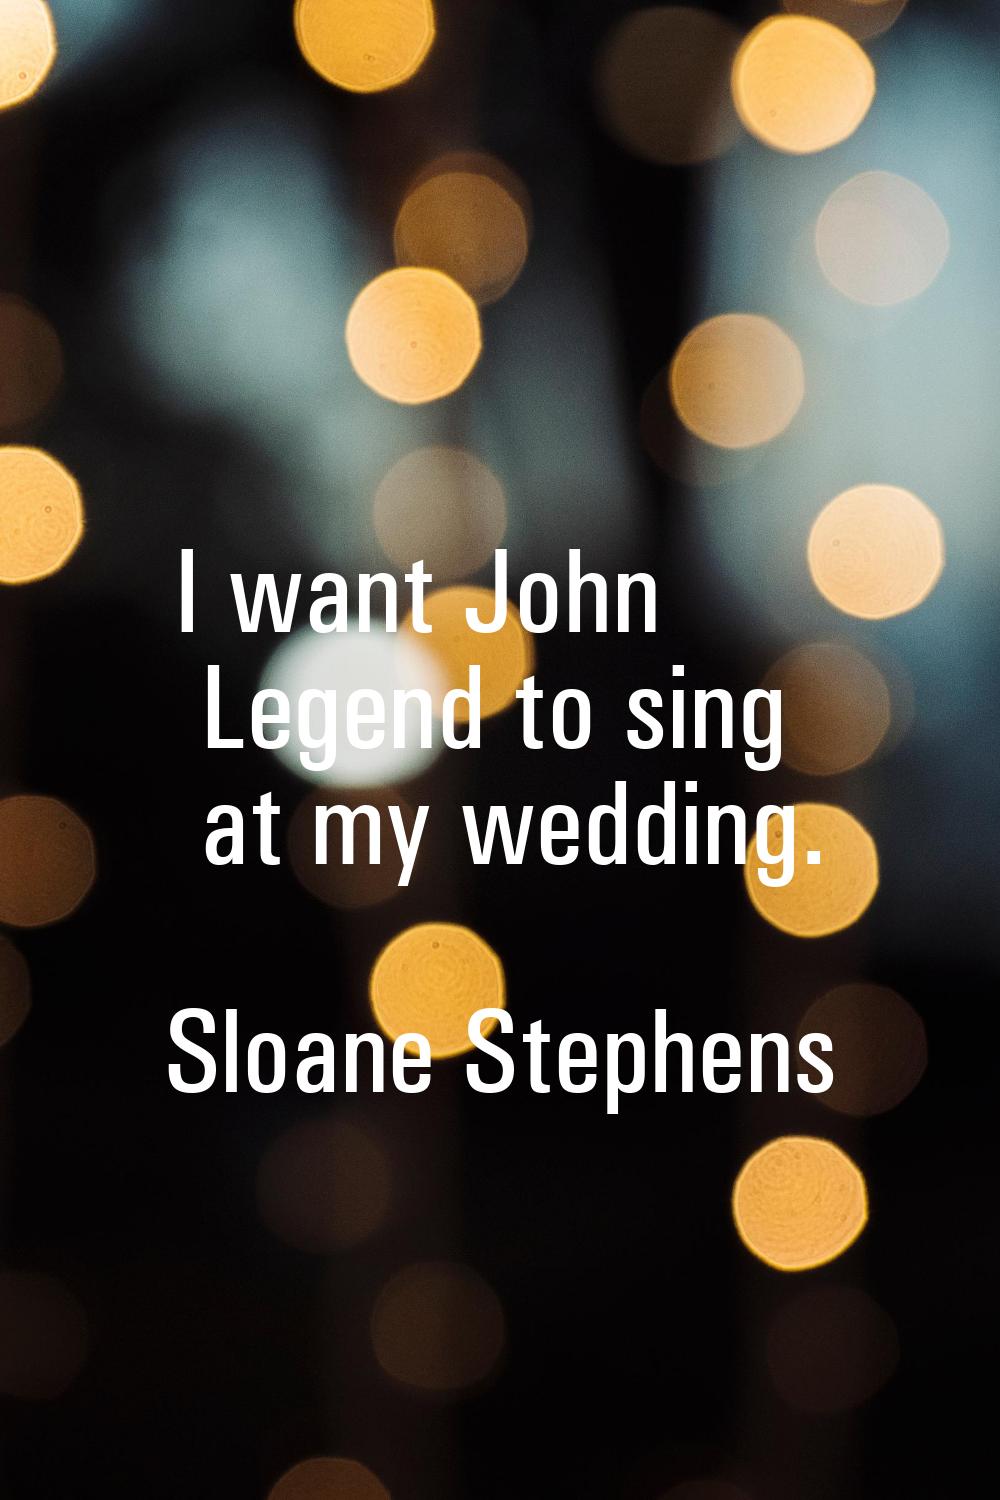 I want John Legend to sing at my wedding.